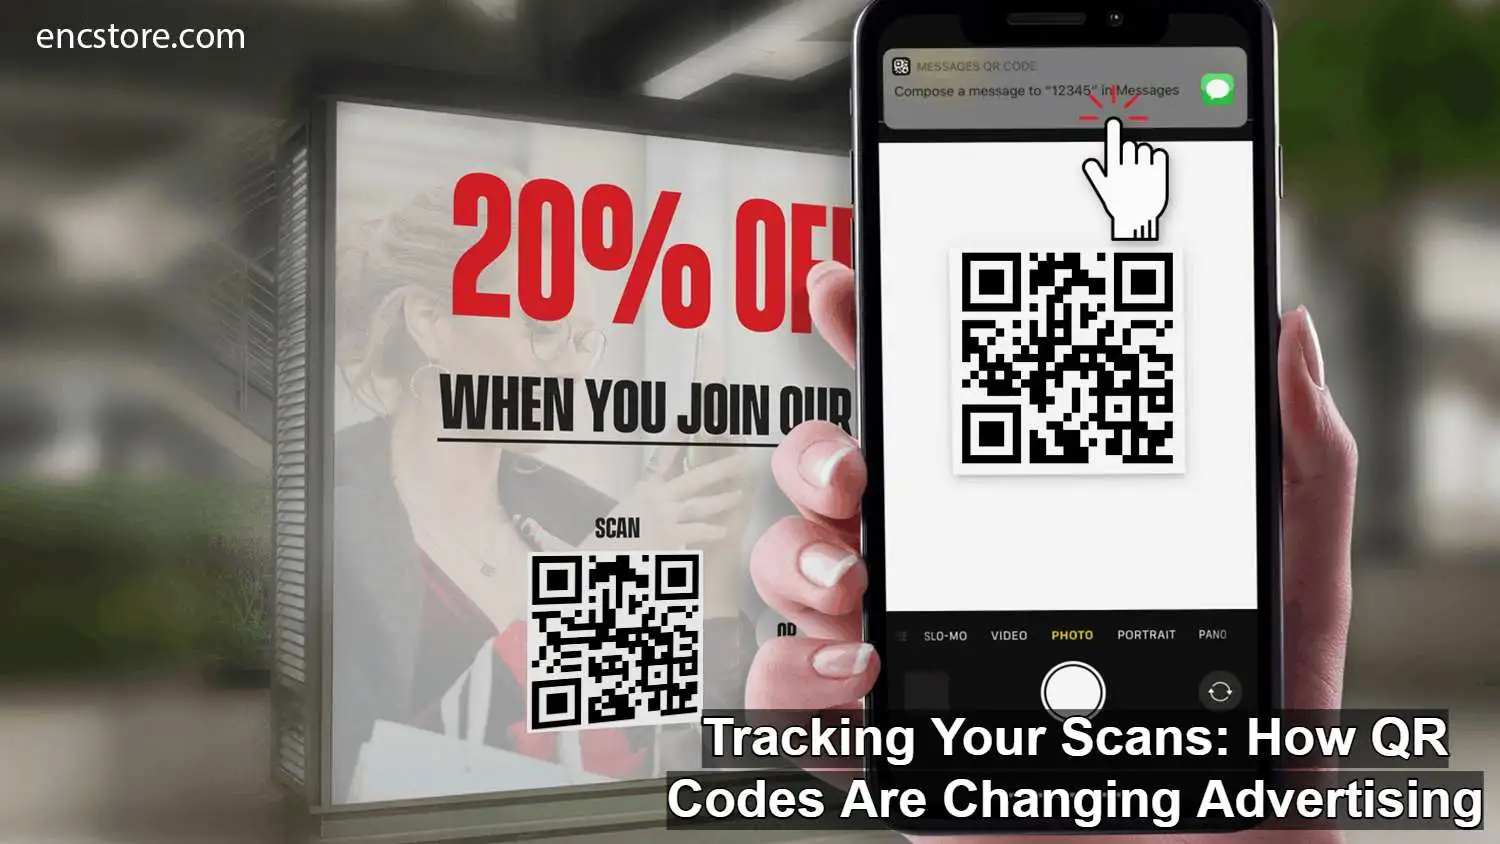 How QR Codes Are Changing Advertising